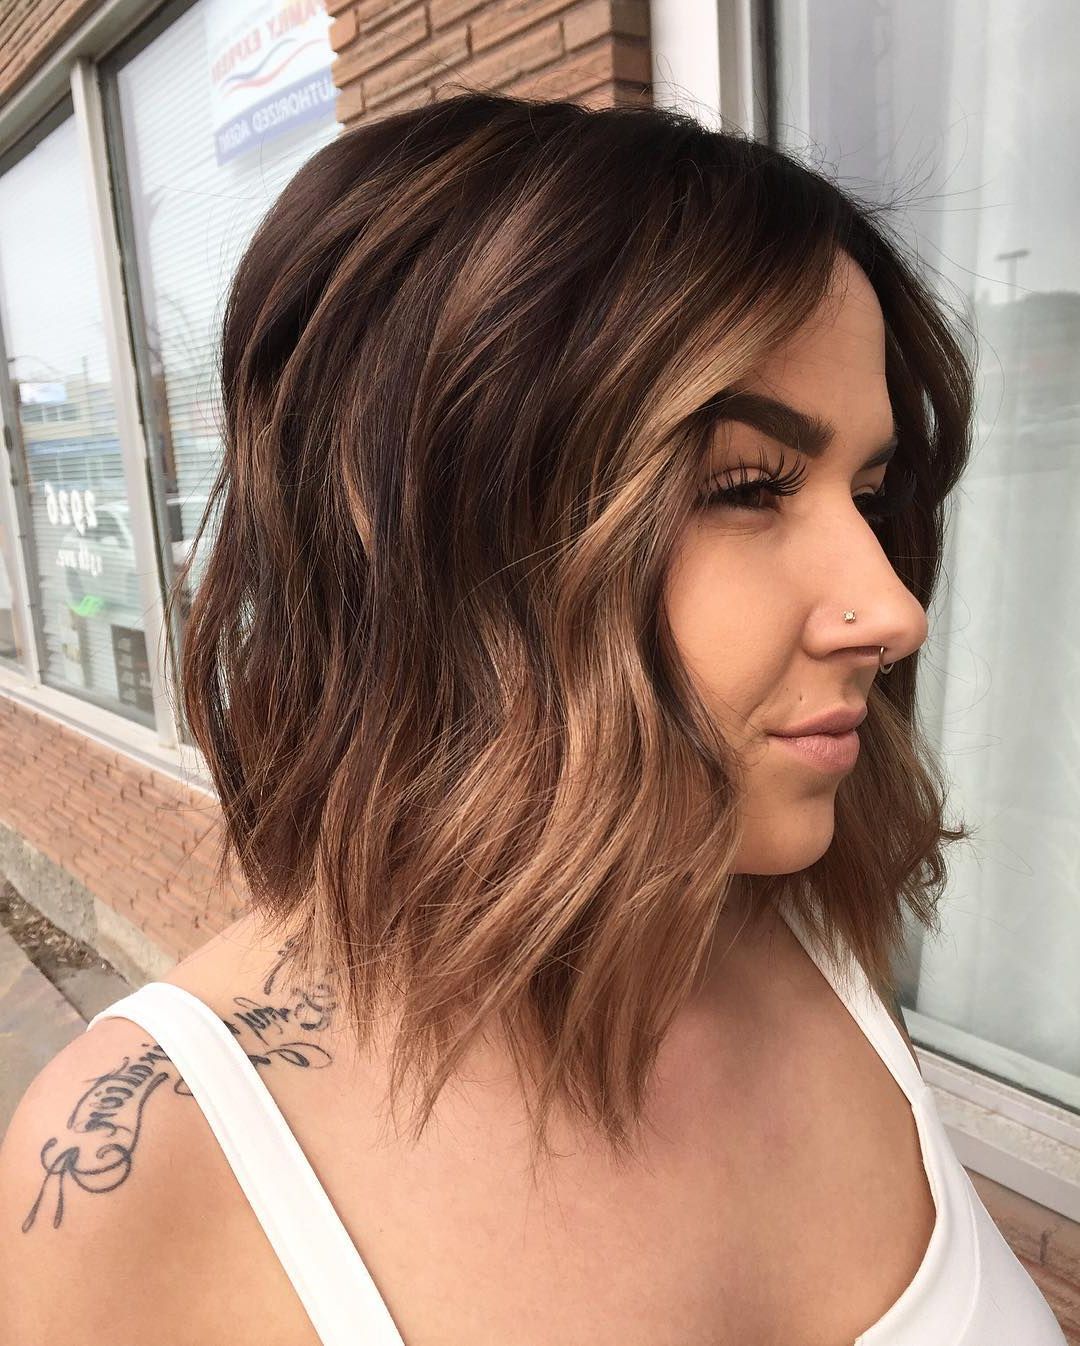 [%most Up To Date Long Tousled Voluminous Hairstyles Intended For 30 Edgy Medium Length Haircuts For Thick Hair [april, 2019]|30 Edgy Medium Length Haircuts For Thick Hair [april, 2019] Regarding 2019 Long Tousled Voluminous Hairstyles%] (View 8 of 20)